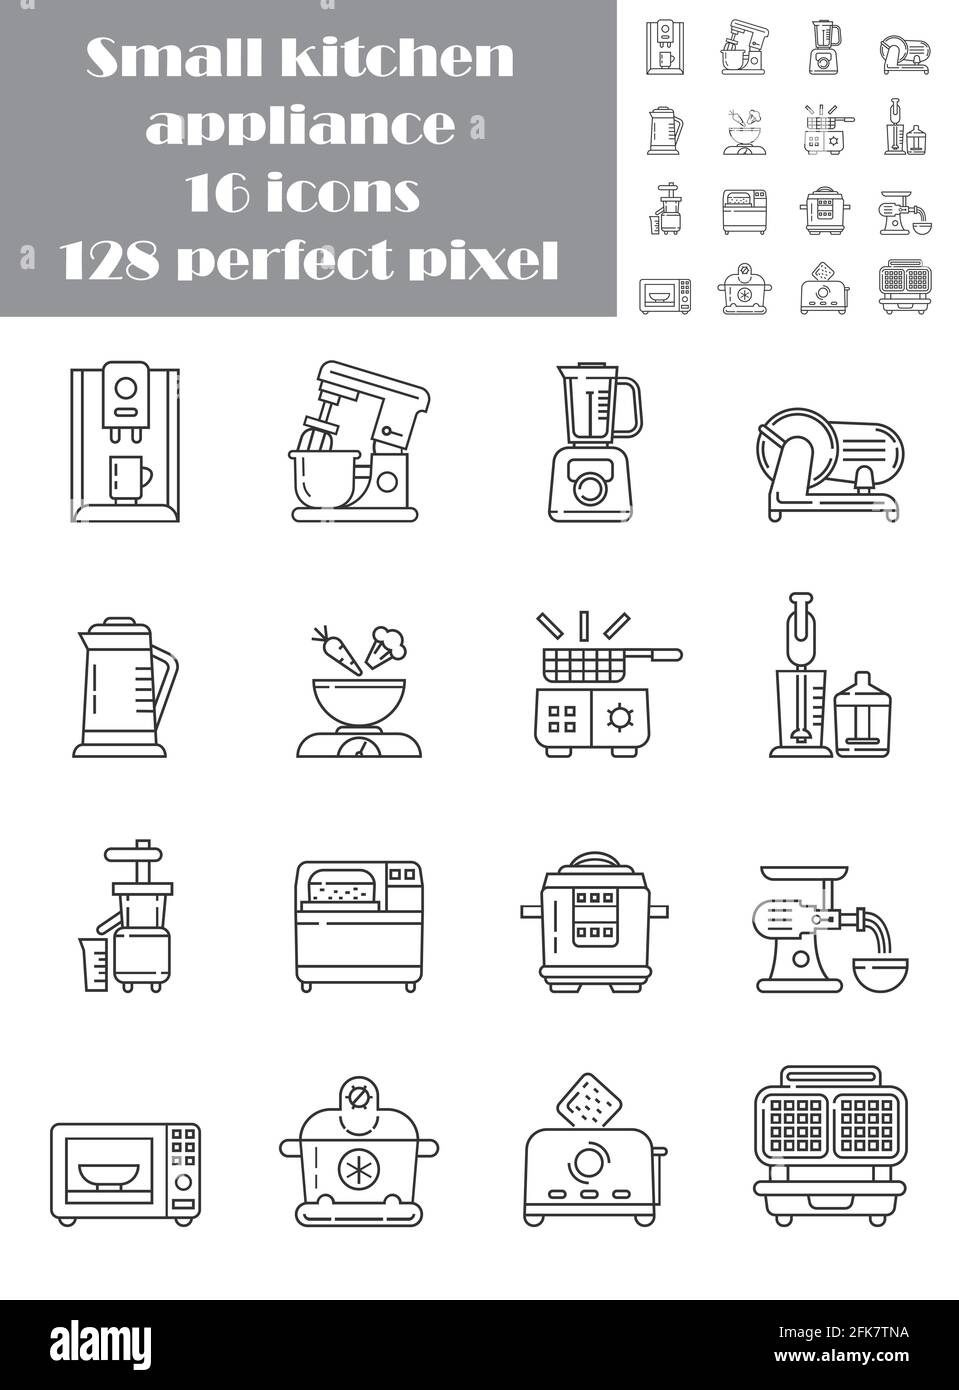 https://c8.alamy.com/comp/2FK7TNA/kitchen-small-appliances-line-pixel-perfect-icons-set-vector-household-tools-symbol-for-app-web-cooking-equipment-are-shown-meat-grinder-blender-2FK7TNA.jpg